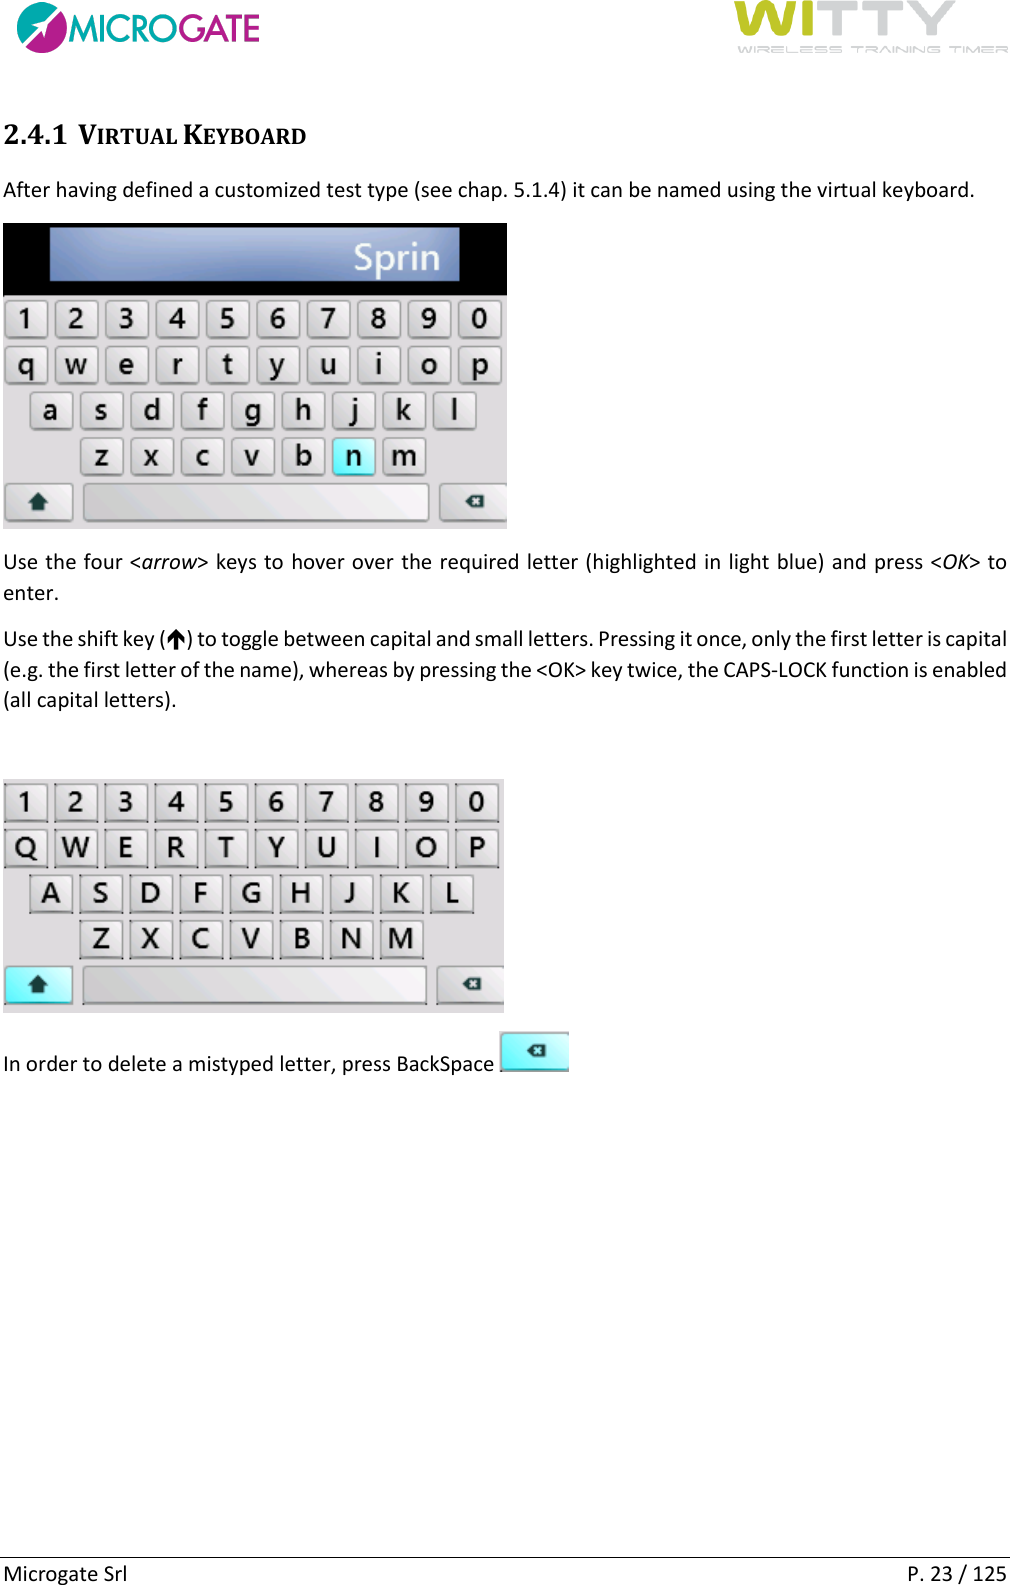      Microgate Srl    P. 23 / 125 2.4.1 VIRTUAL KEYBOARD After having defined a customized test type (see chap. 5.1.4) it can be named using the virtual keyboard.  Use the four &lt;arrow&gt; keys to hover over the required letter (highlighted in light blue) and press &lt;OK&gt; to enter. Use the shift key () to toggle between capital and small letters. Pressing it once, only the first letter is capital (e.g. the first letter of the name), whereas by pressing the &lt;OK&gt; key twice, the CAPS-LOCK function is enabled (all capital letters).    In order to delete a mistyped letter, press BackSpace     